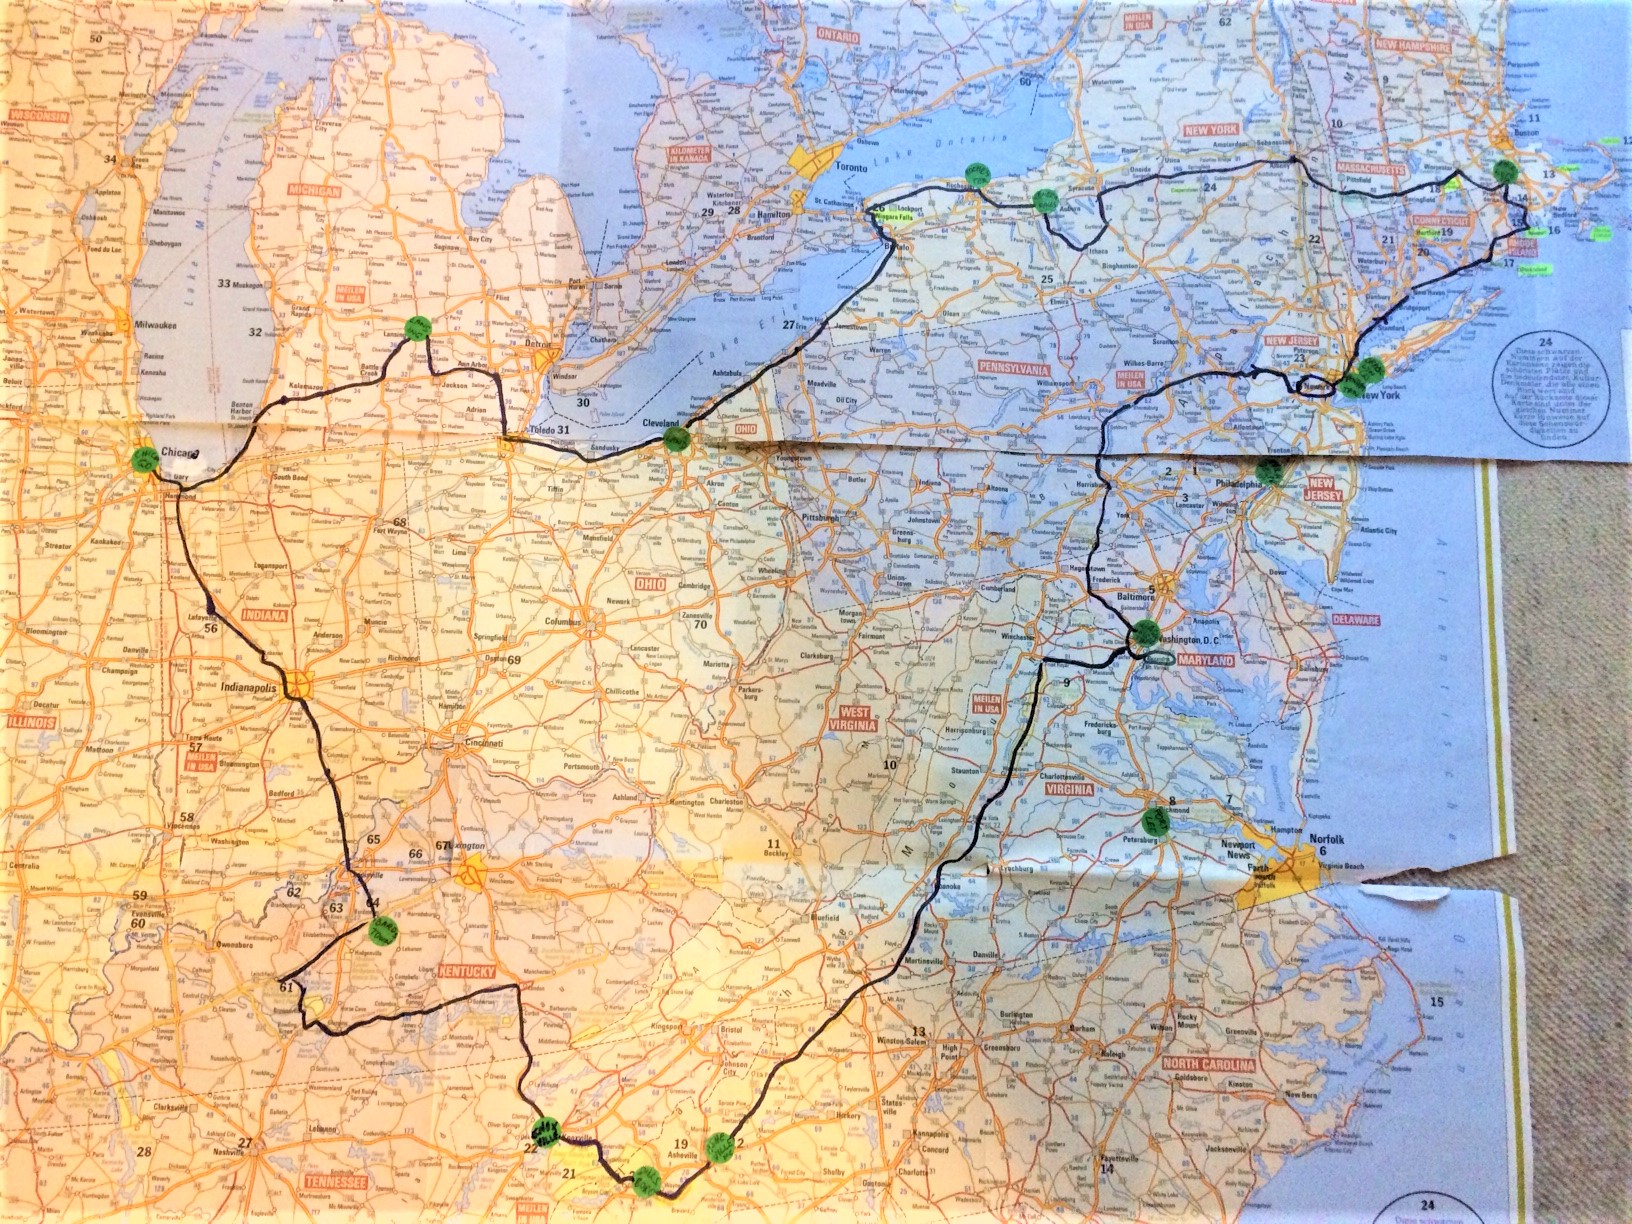 The route of Marianne Wimmer to the women's museums in the USA